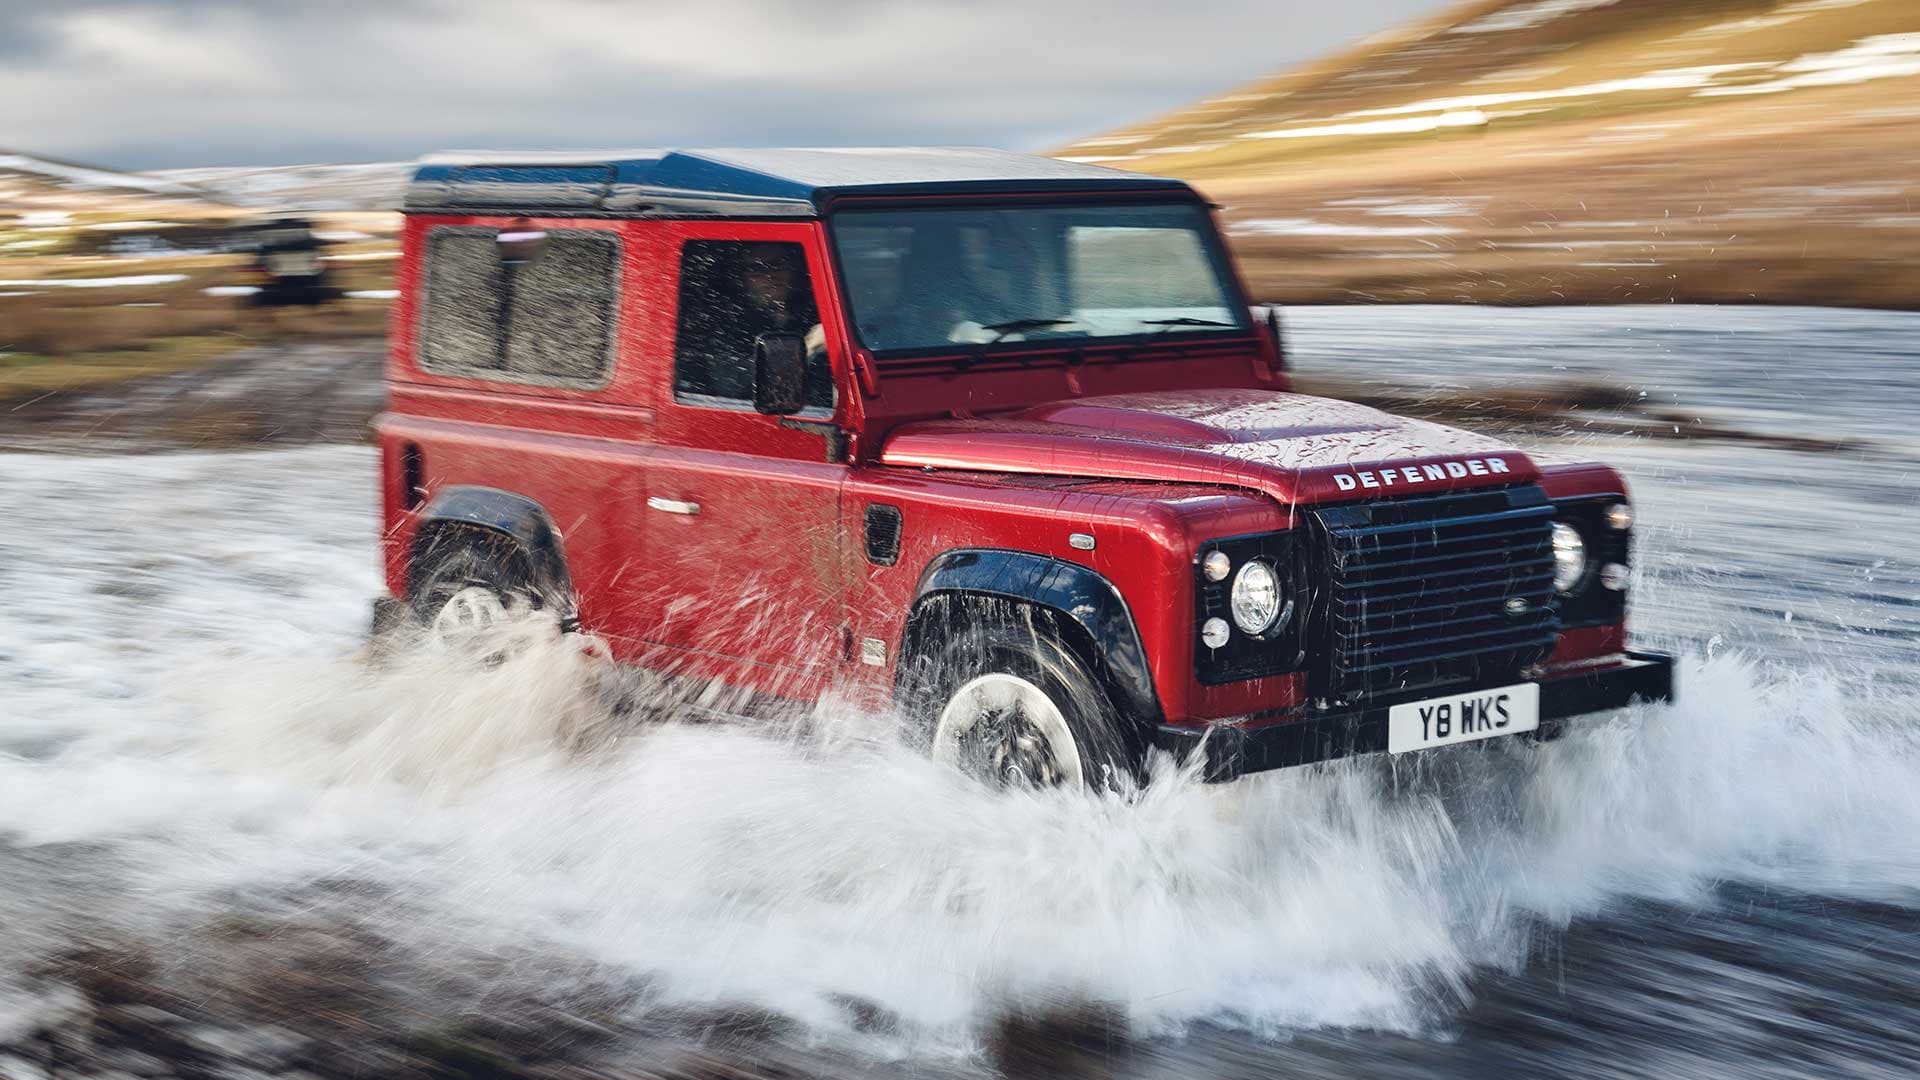 Land Rover Reveals 400-HP V8 Defender Works Models to Celebrate the Brand’s 70th Anniversary